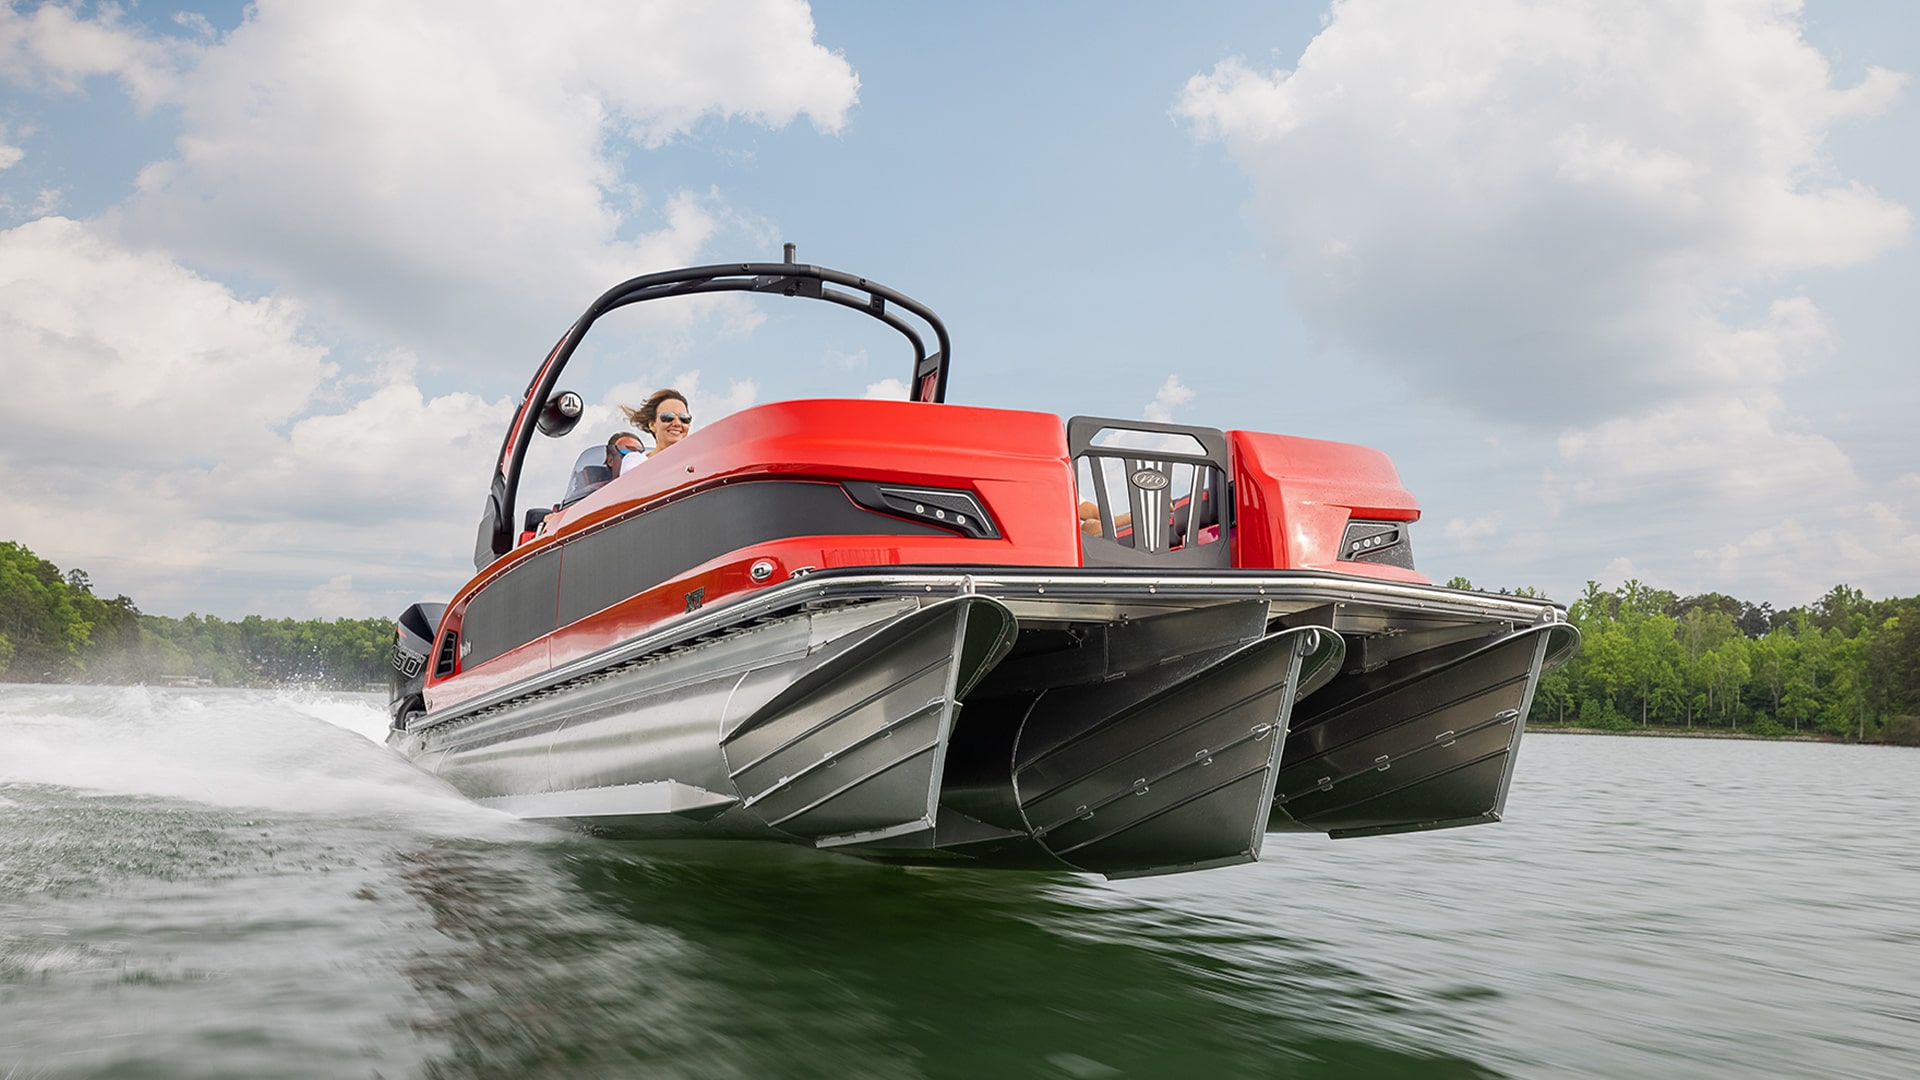 Hull Technology in action on a Manitou Pontoon Boat